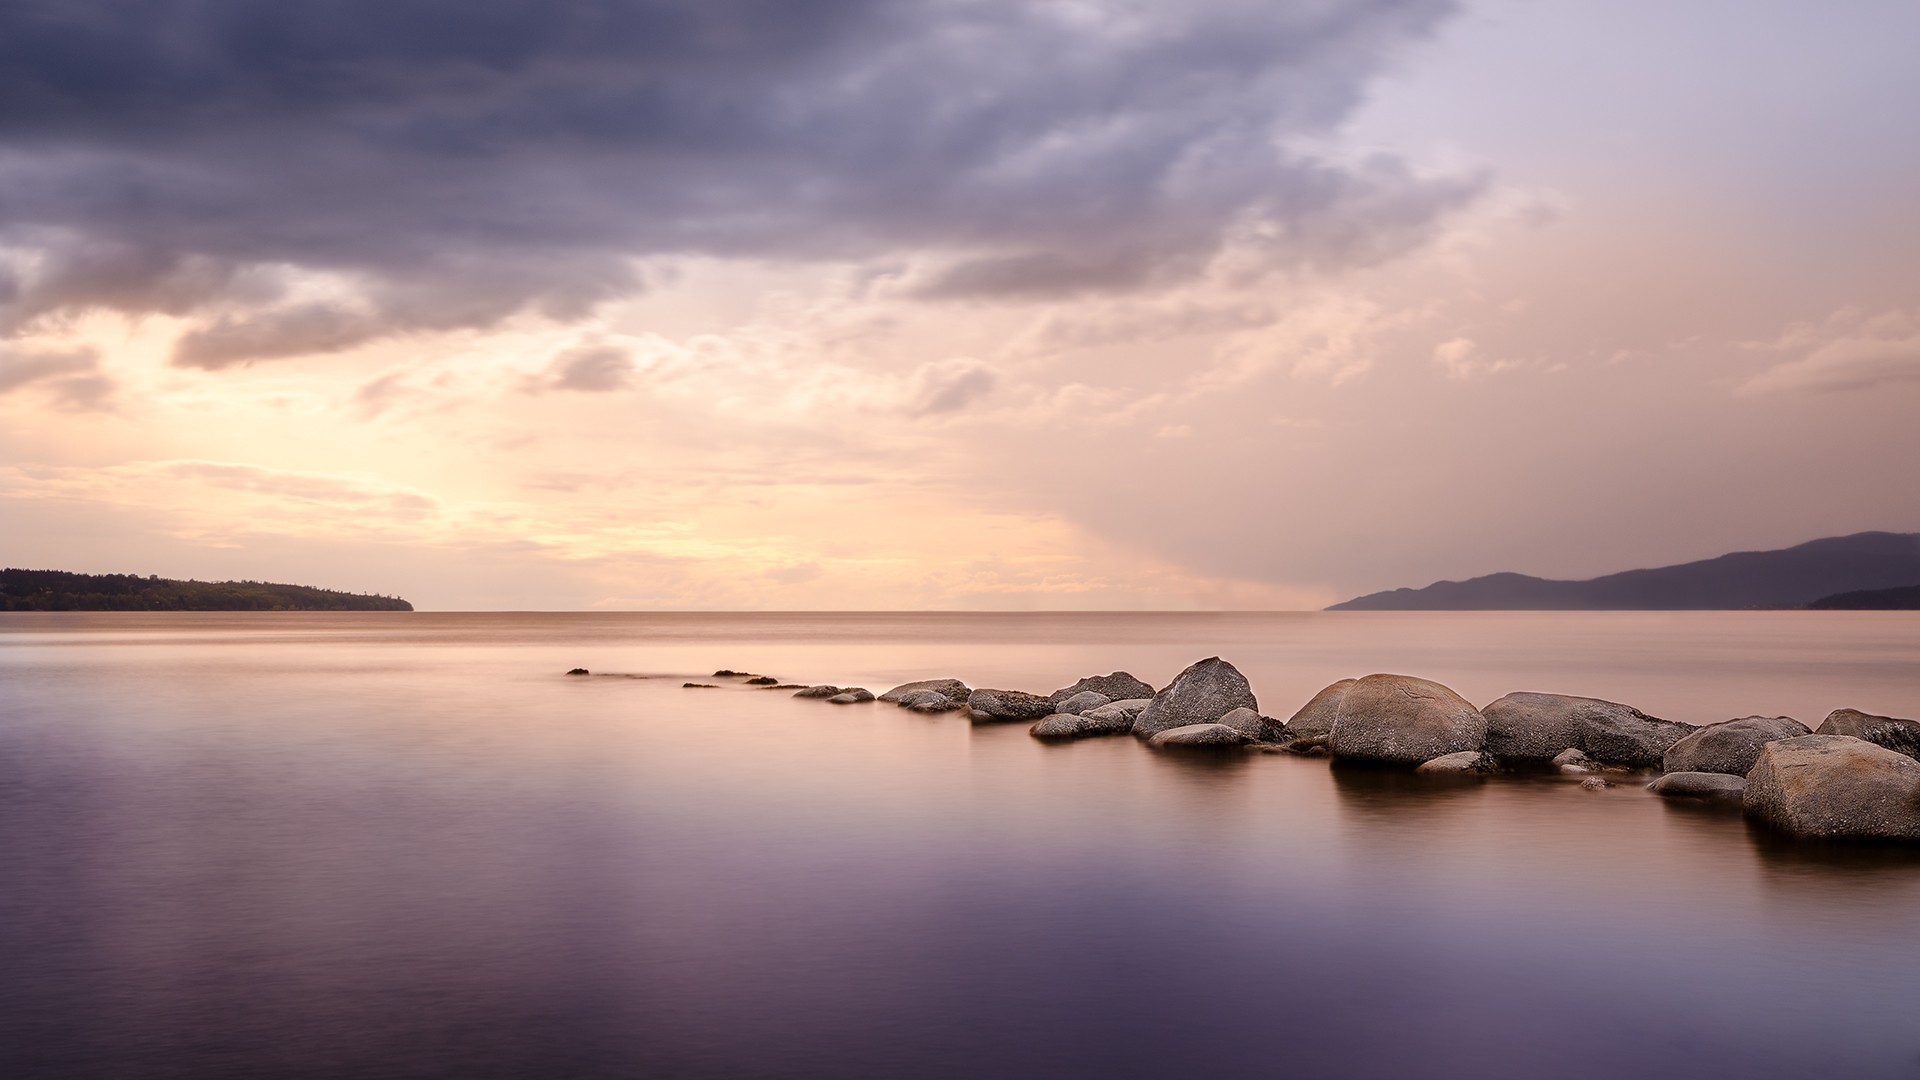 calm waters, Calm, Landscape, Sky, Stones, Nature Wallpapers HD